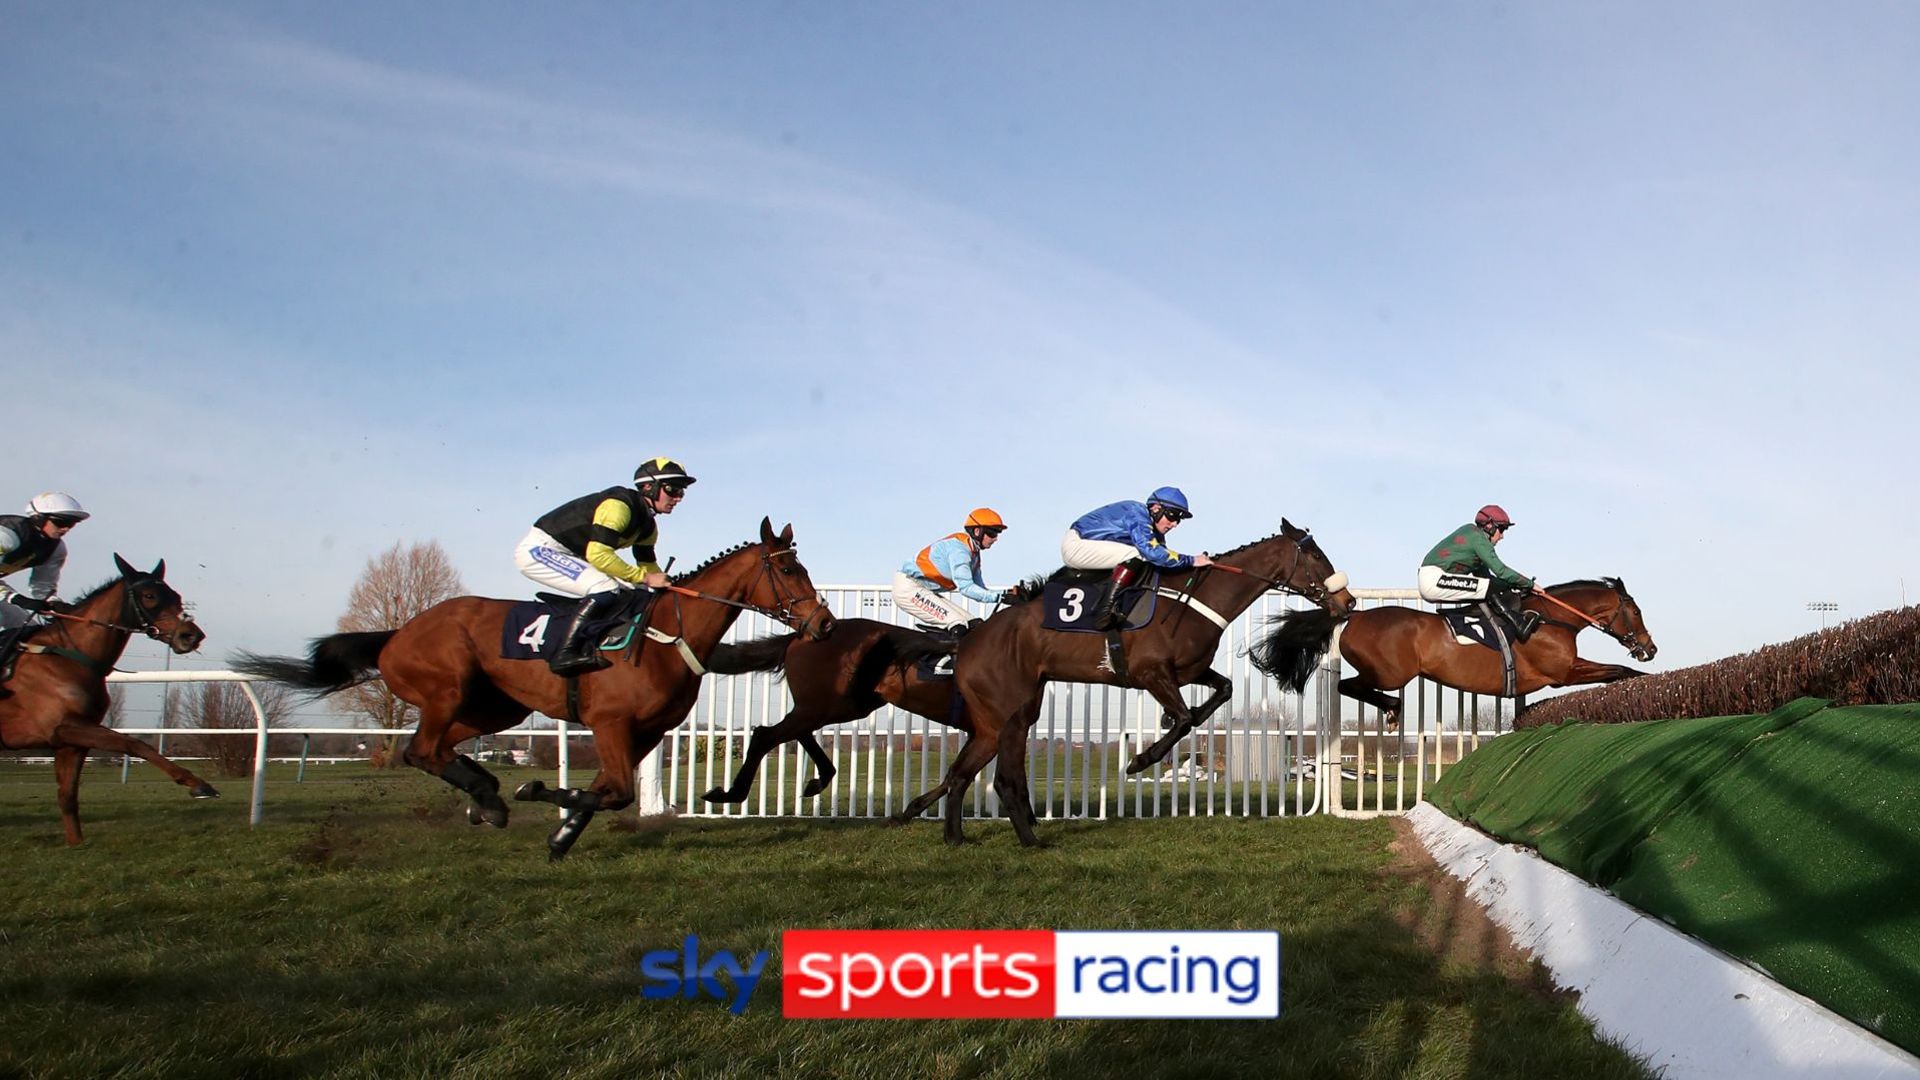 Today on Sky Sports Racing: Supremely West chases Southwell hat-trick